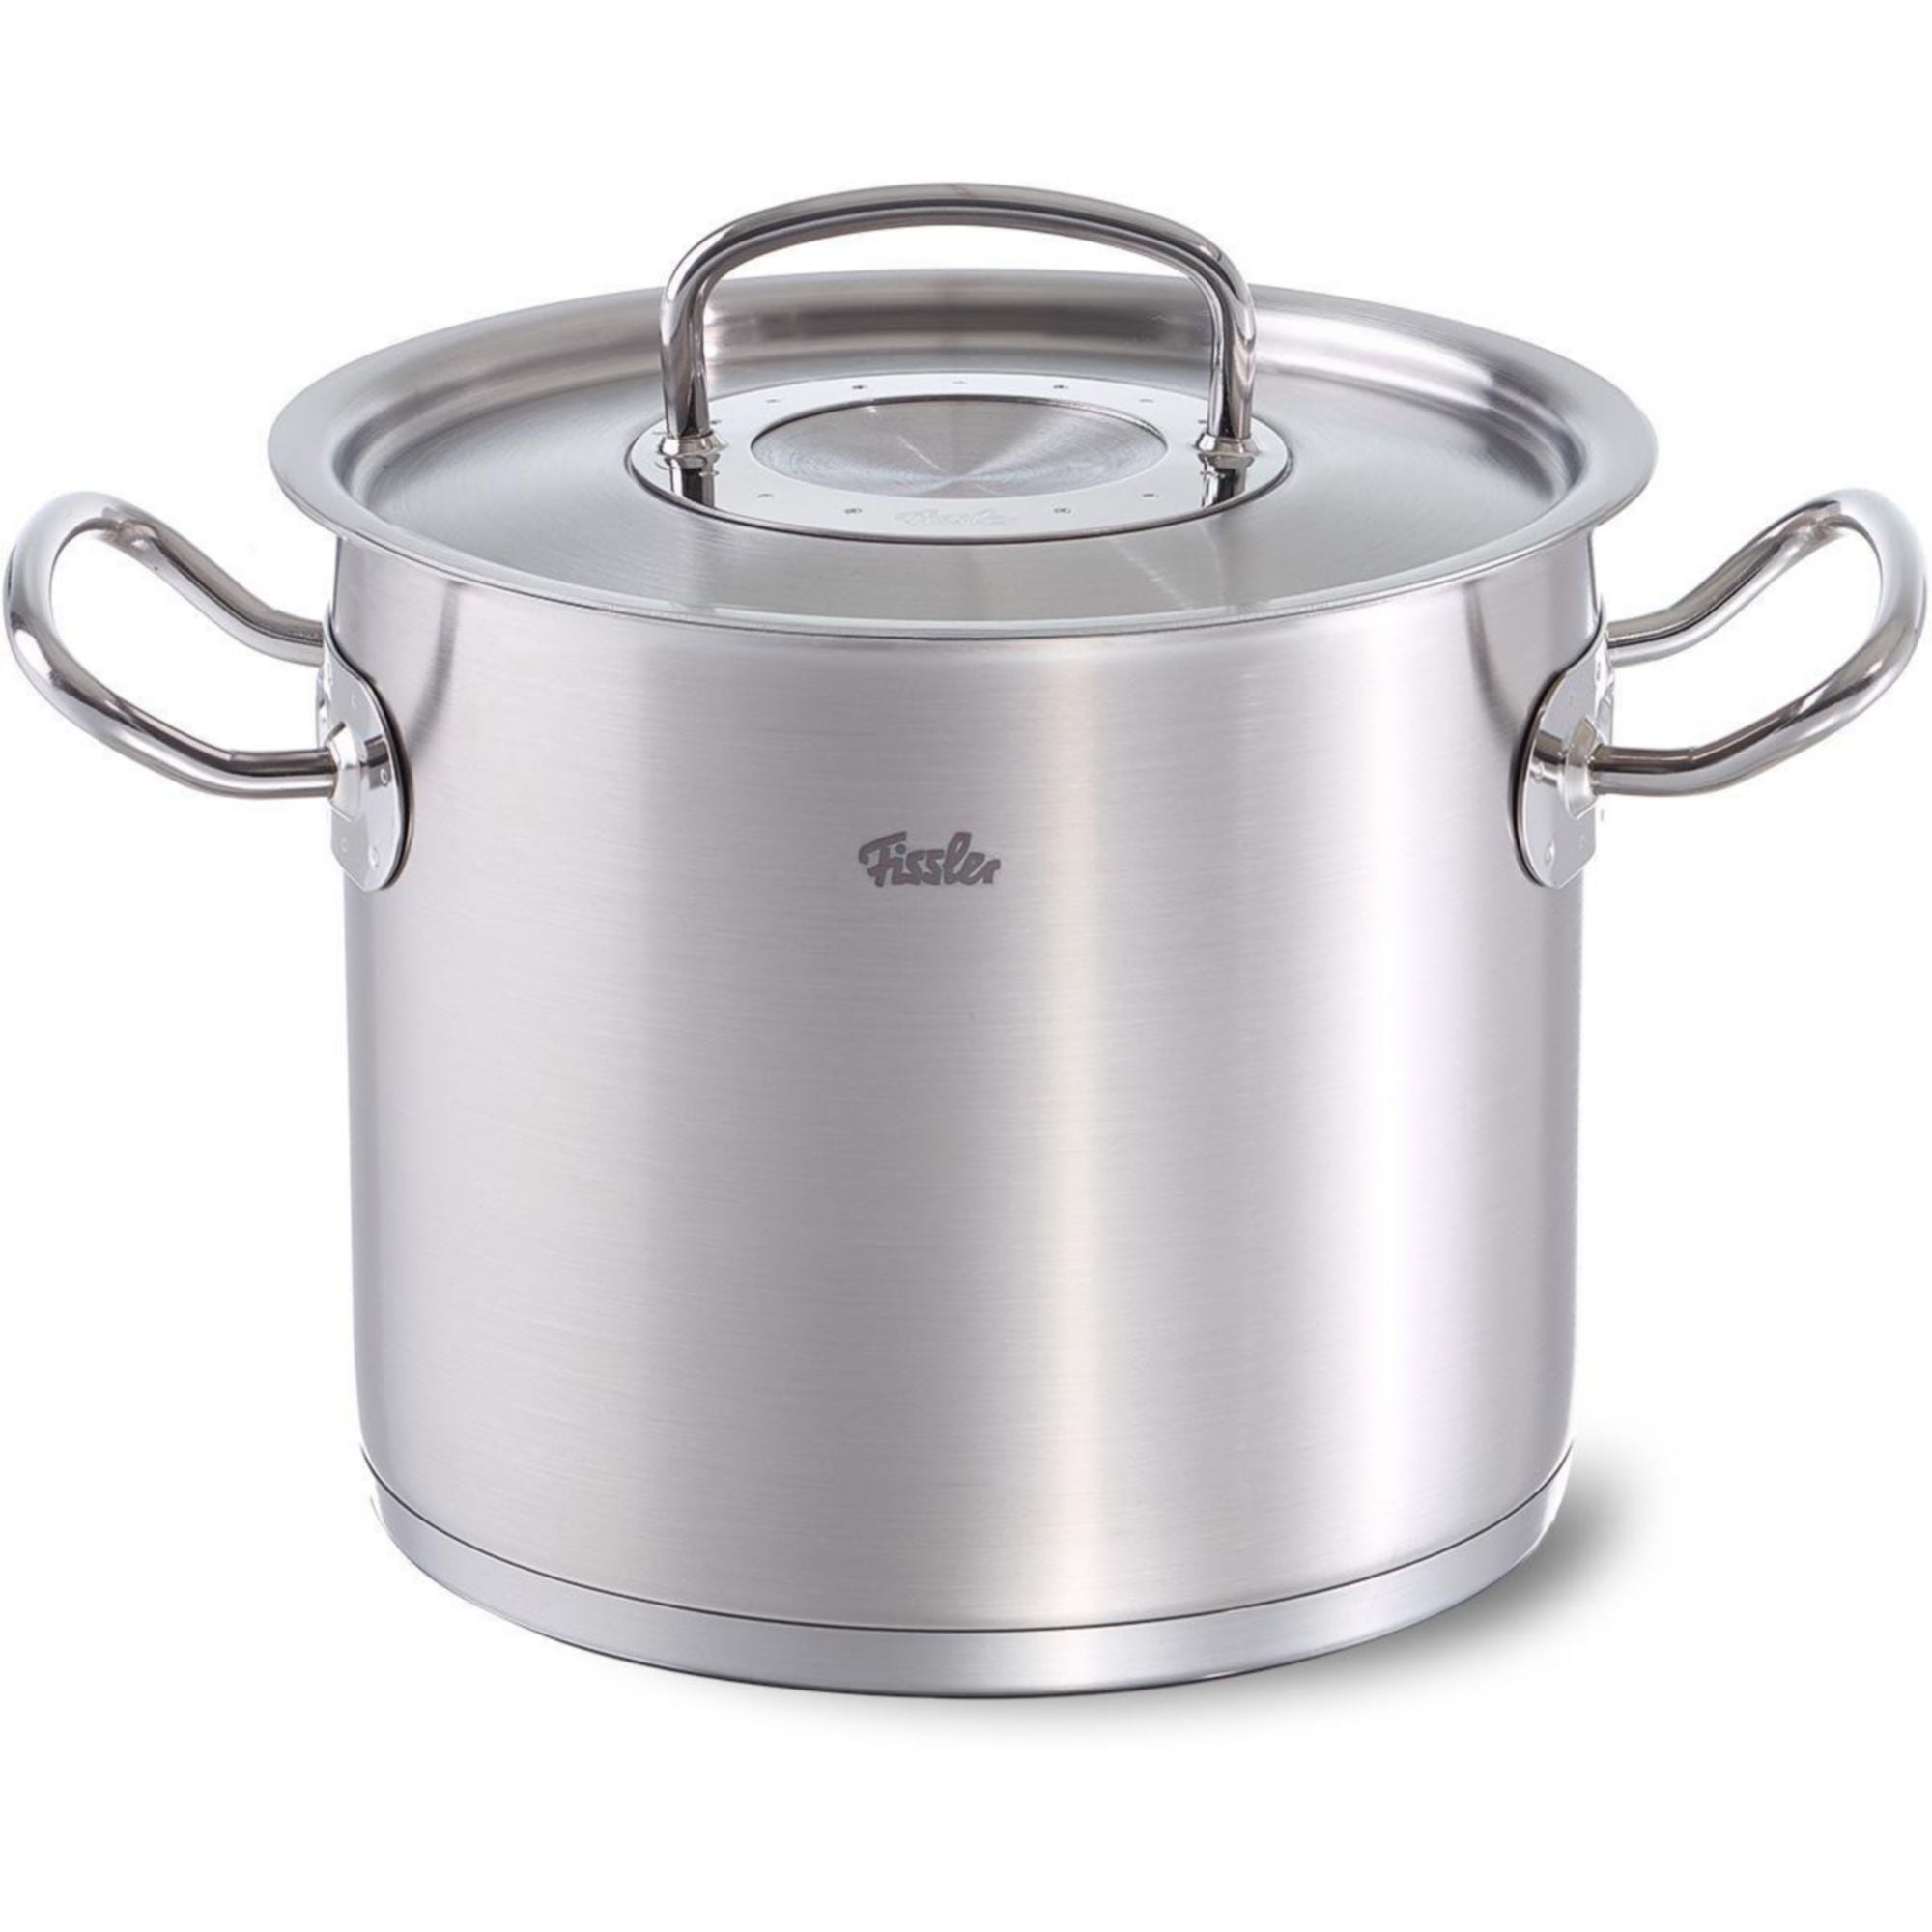 Fissler Original-Profi Collection® 2019 Stainless Steel Tall Stock Pot with  Lid, 9.6 Quart